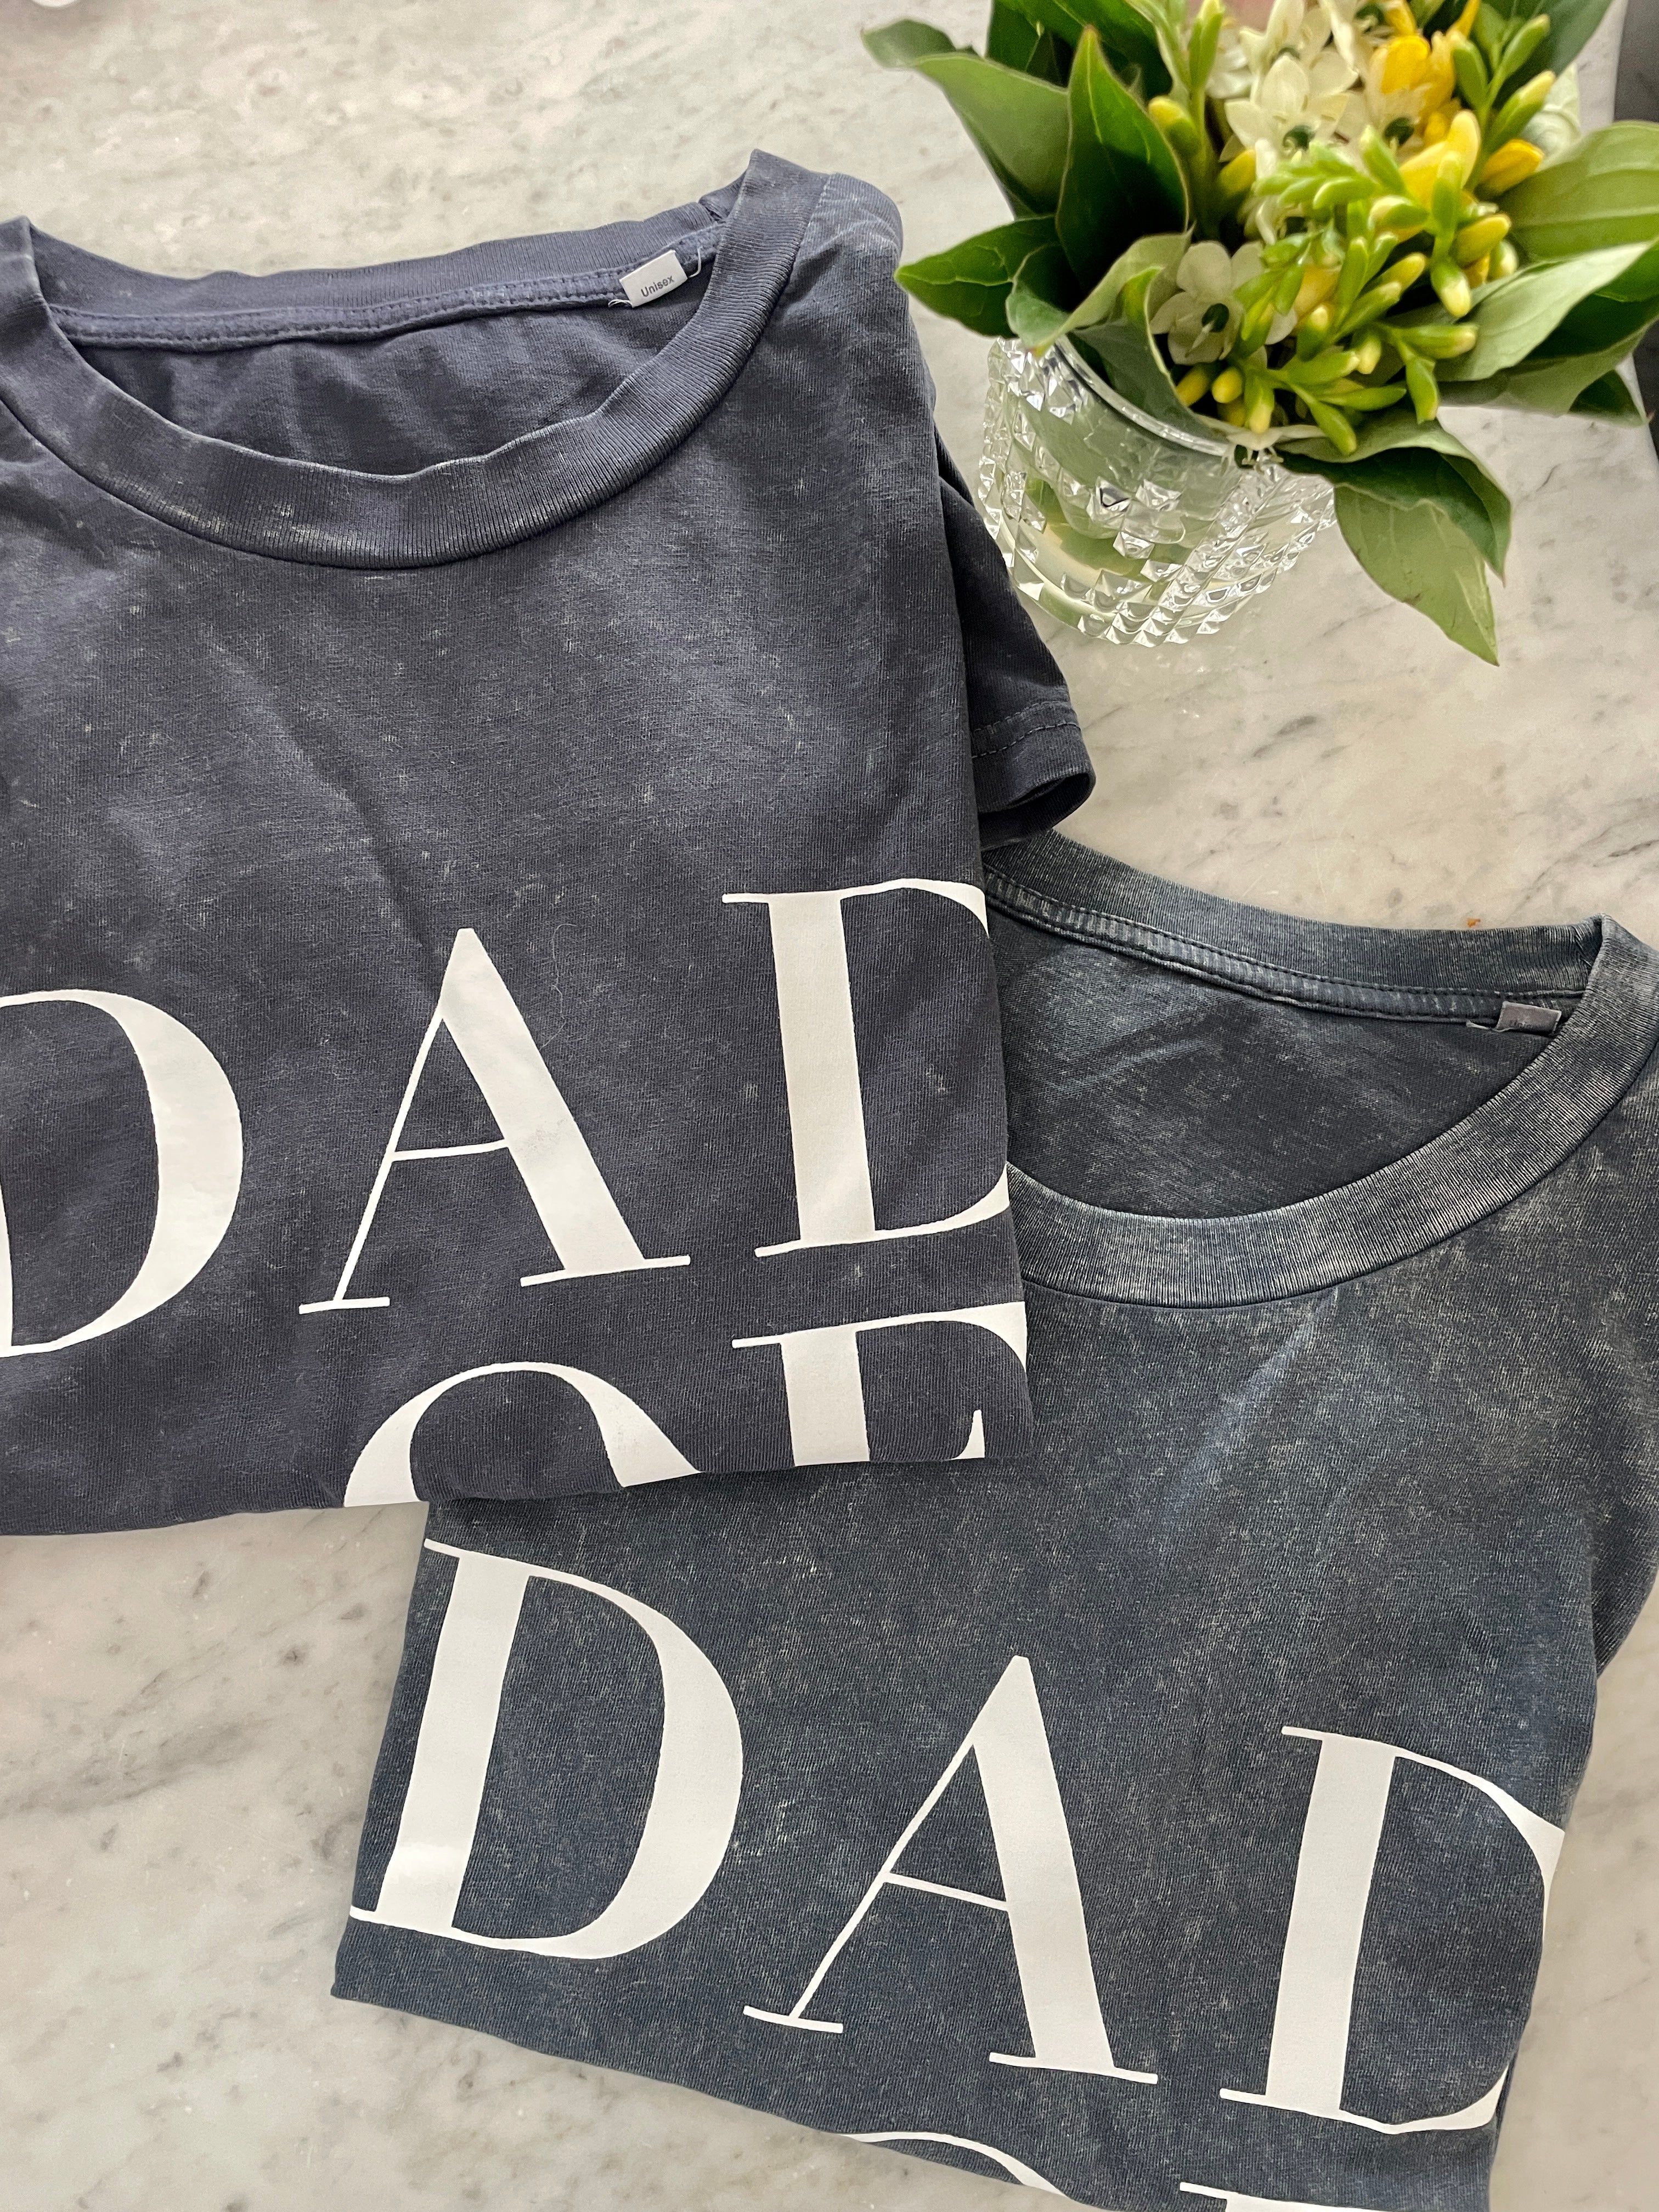 A vintage charcoal gray T Shirt DAD OF TWO